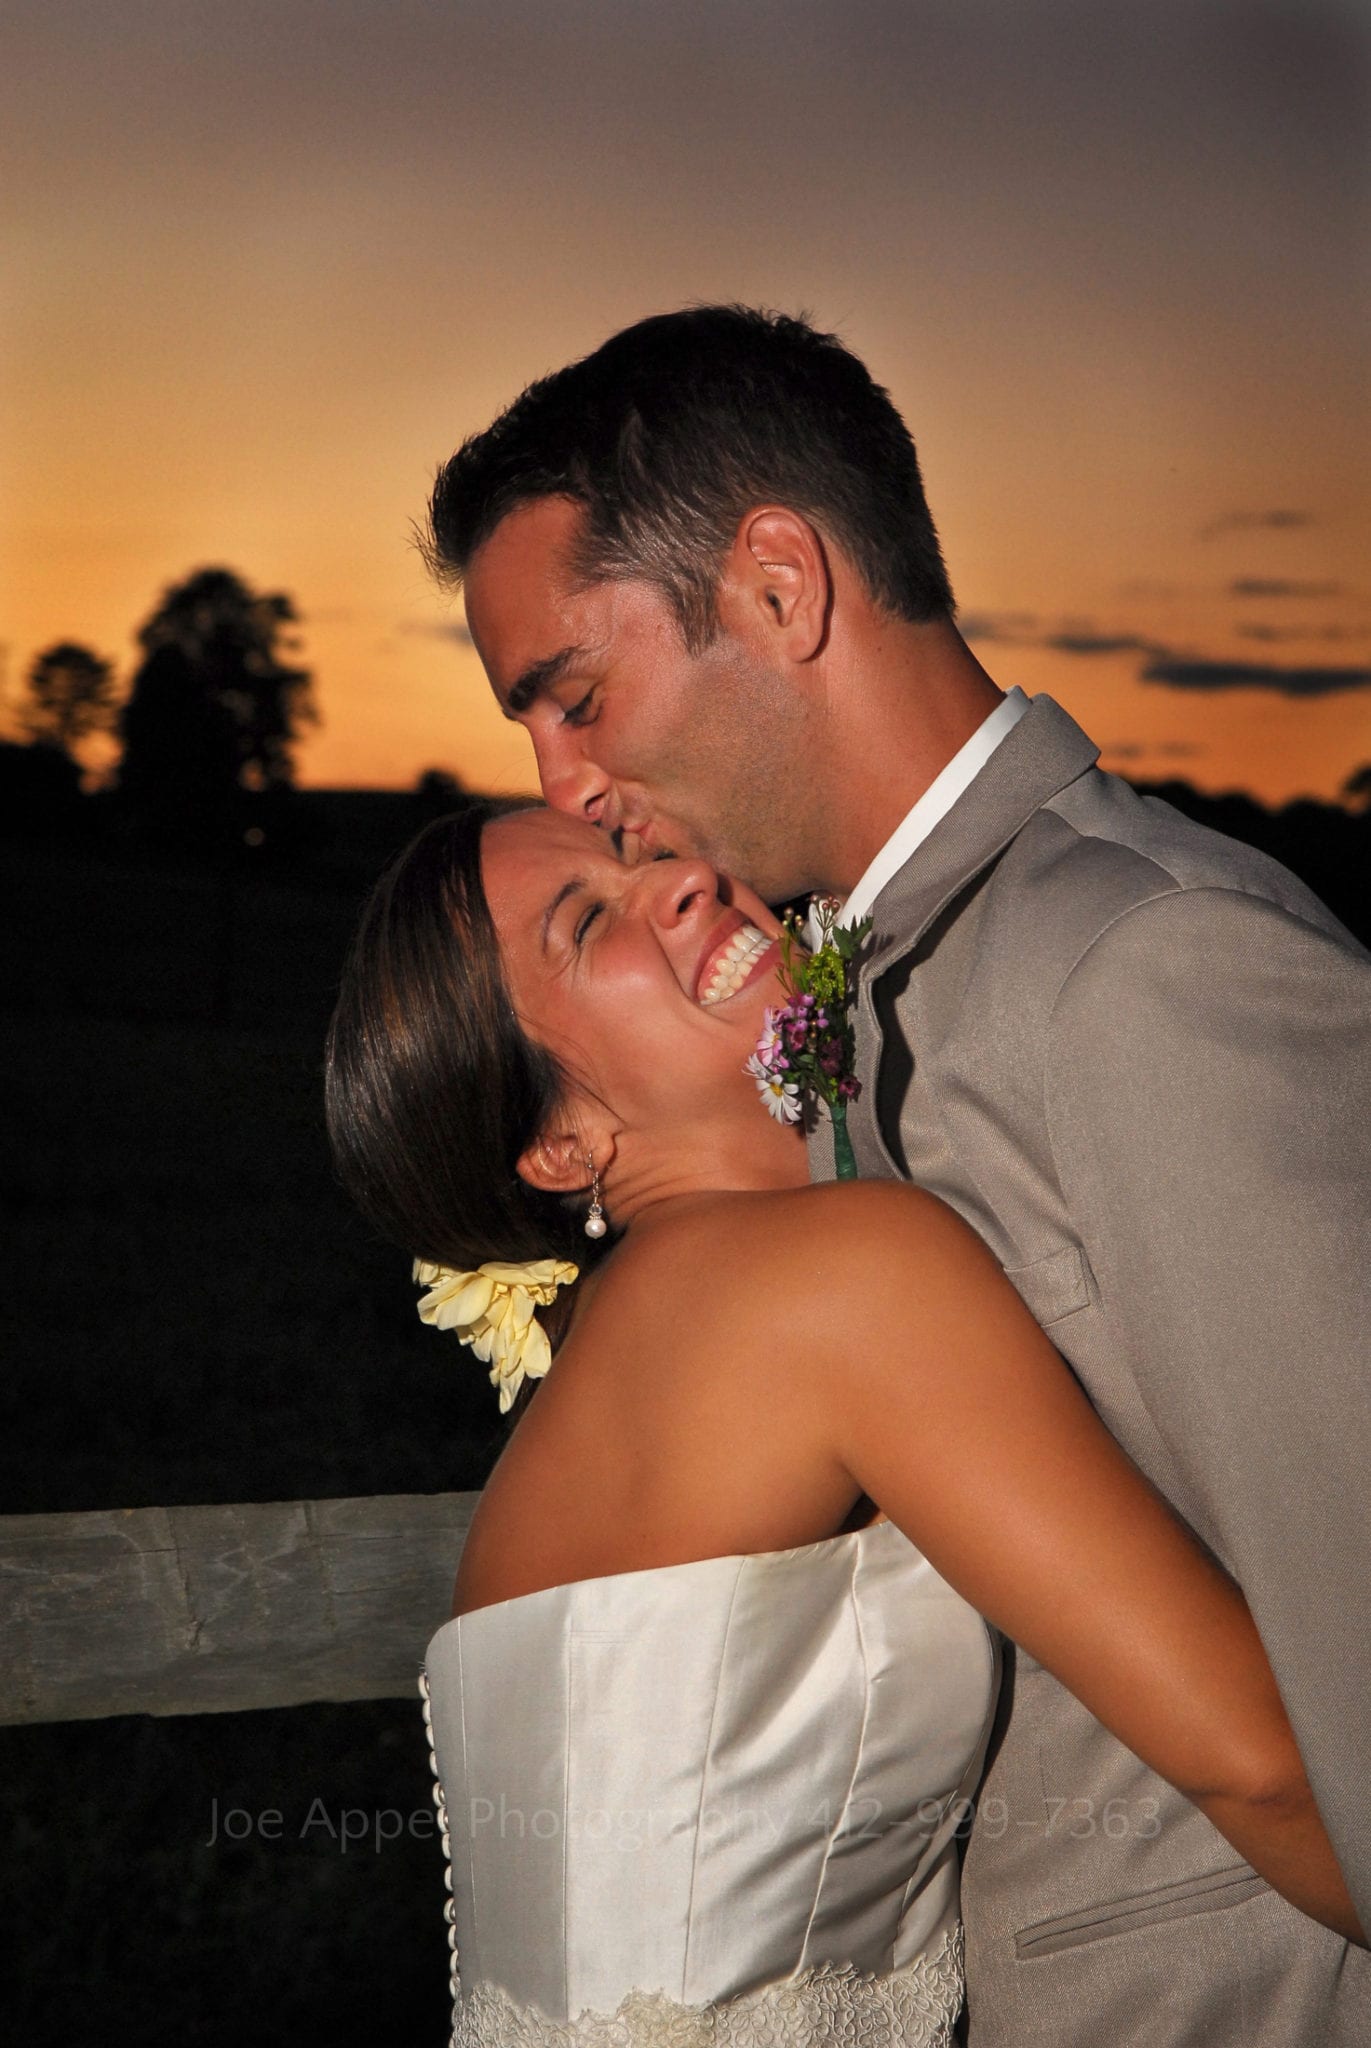 With deep orange sunset behind them a groom hugs his bride tightly and kisses her on the forehead. The bride grins. Armstrong Farms Weddings